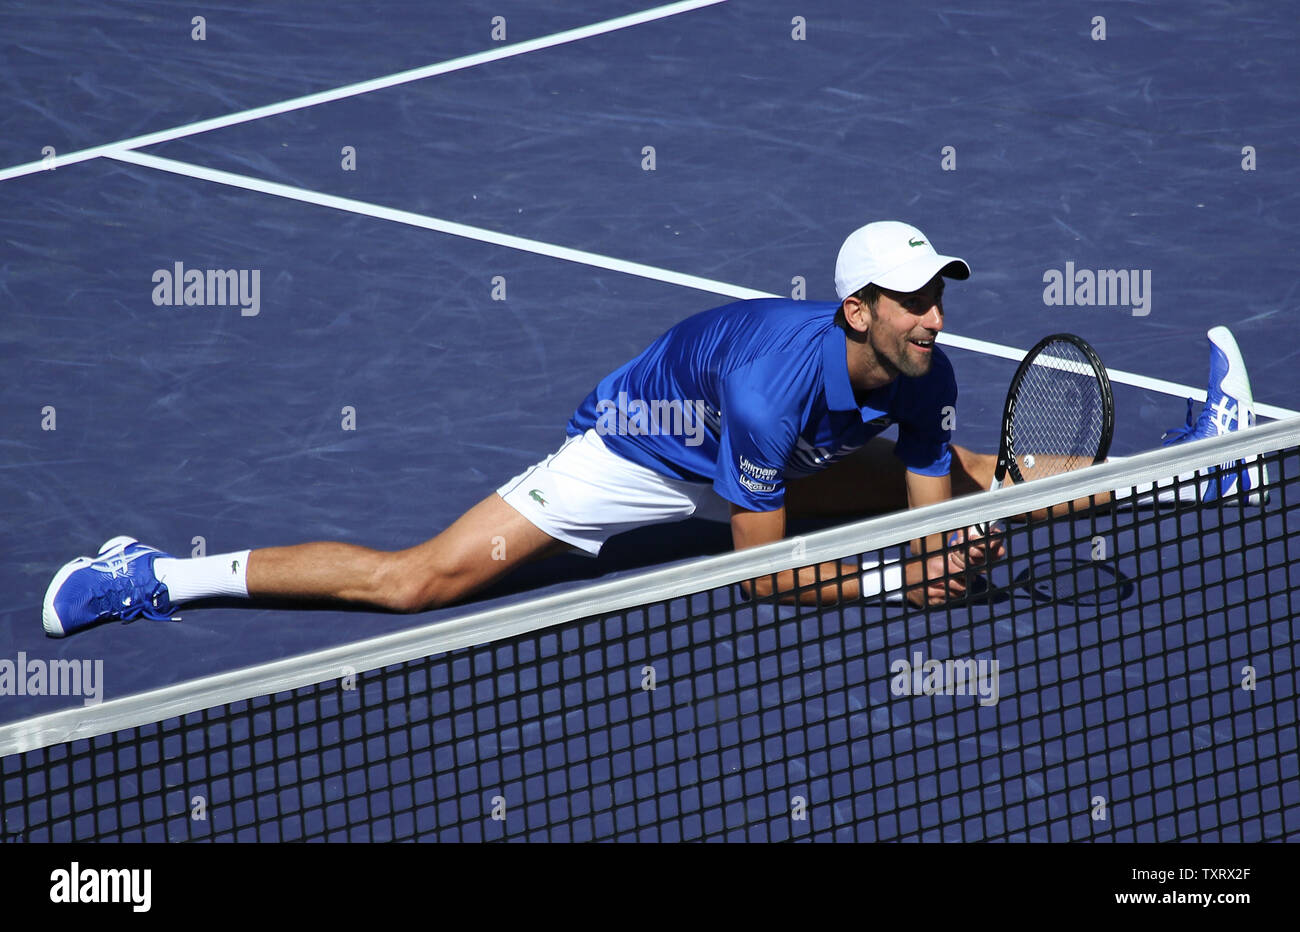 Novak Djokovic of Serbia does the splits during an exhibition match at the  BNP Paribas Open in Indian Wells, California on March 16, 2019. The  exhibition was arranged after the cancellation of